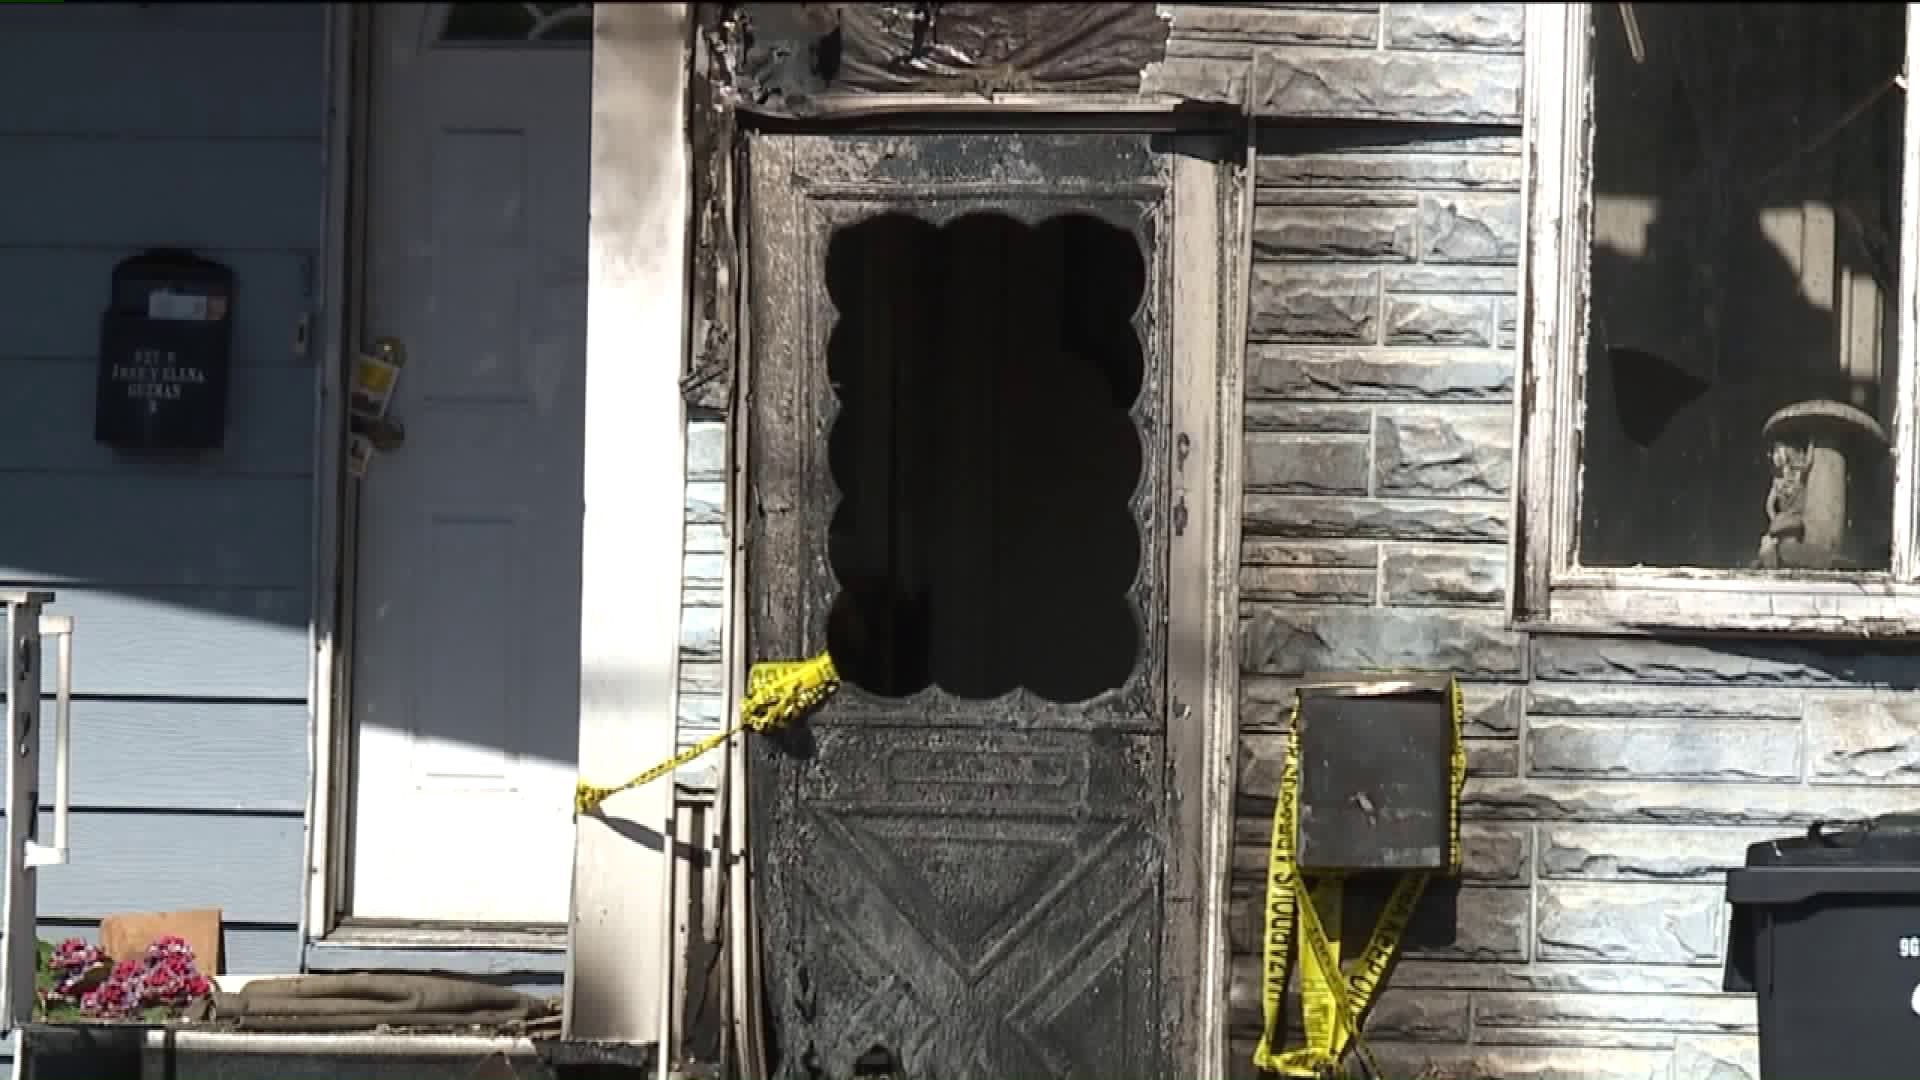 Man and Toddler Saved from Fire